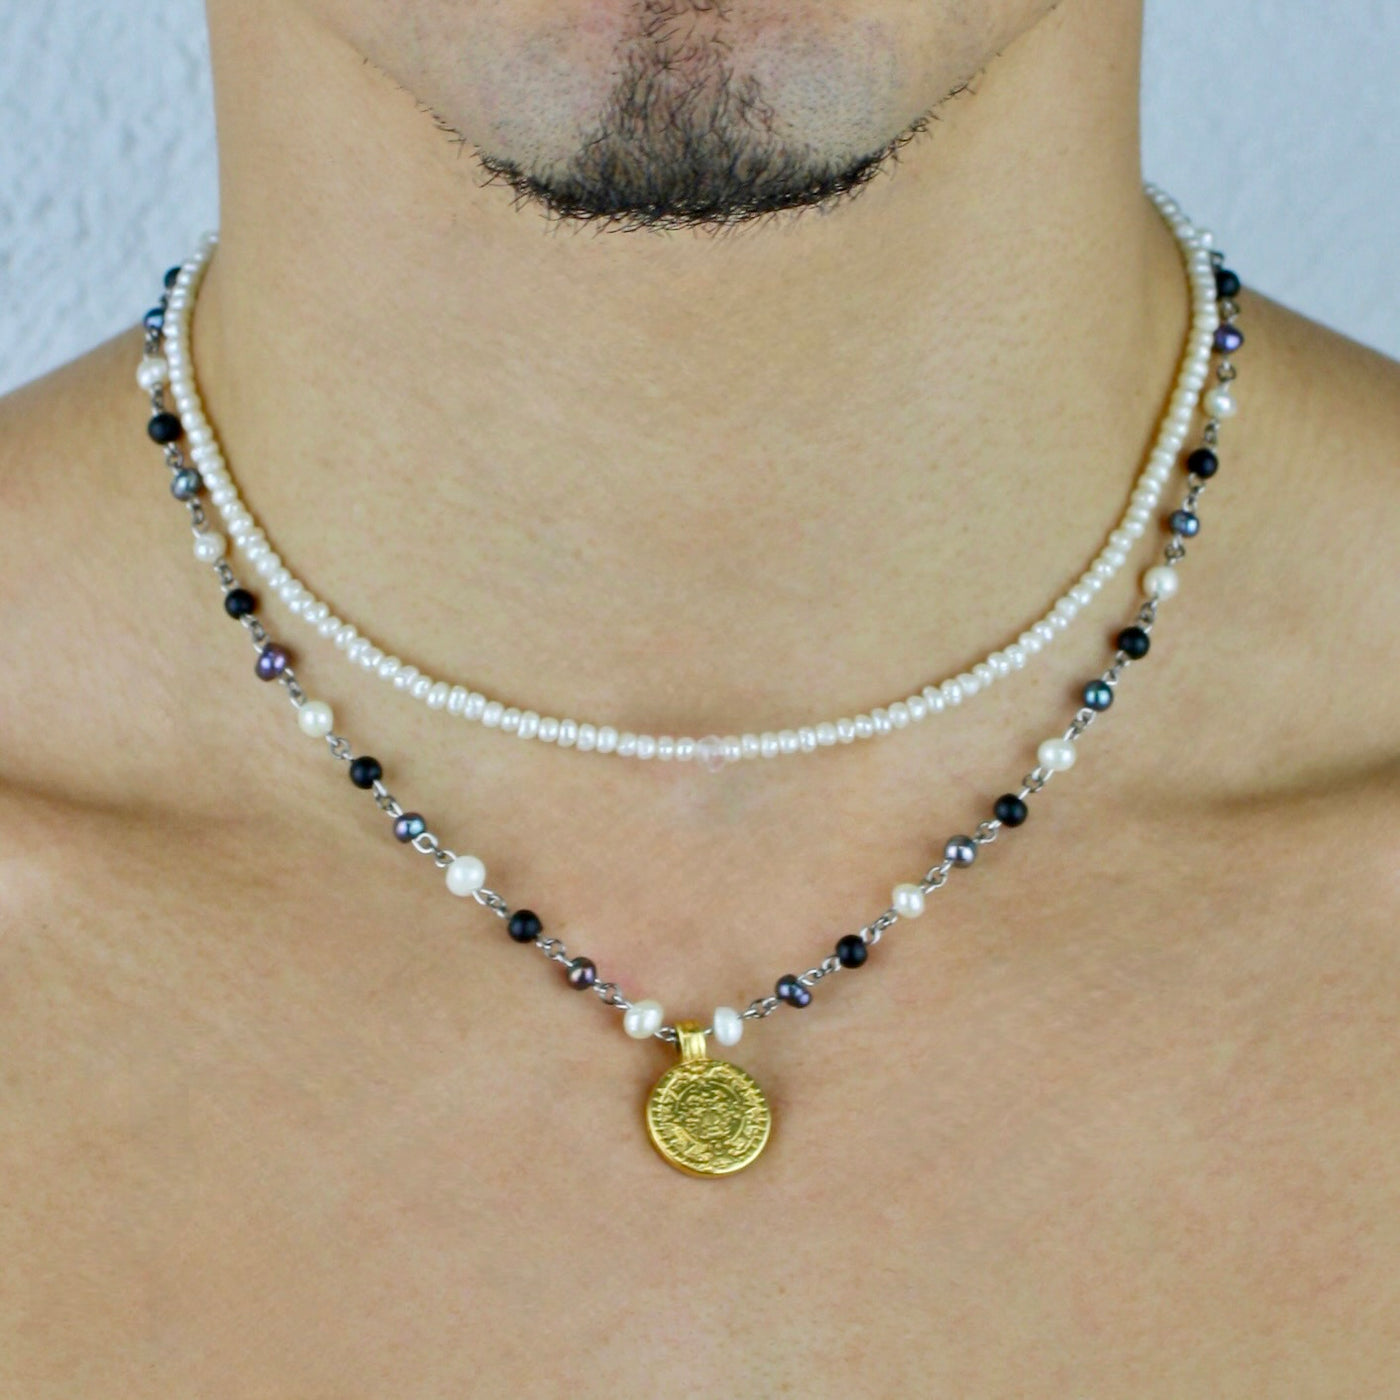 Mixed Pearl Coin Necklace